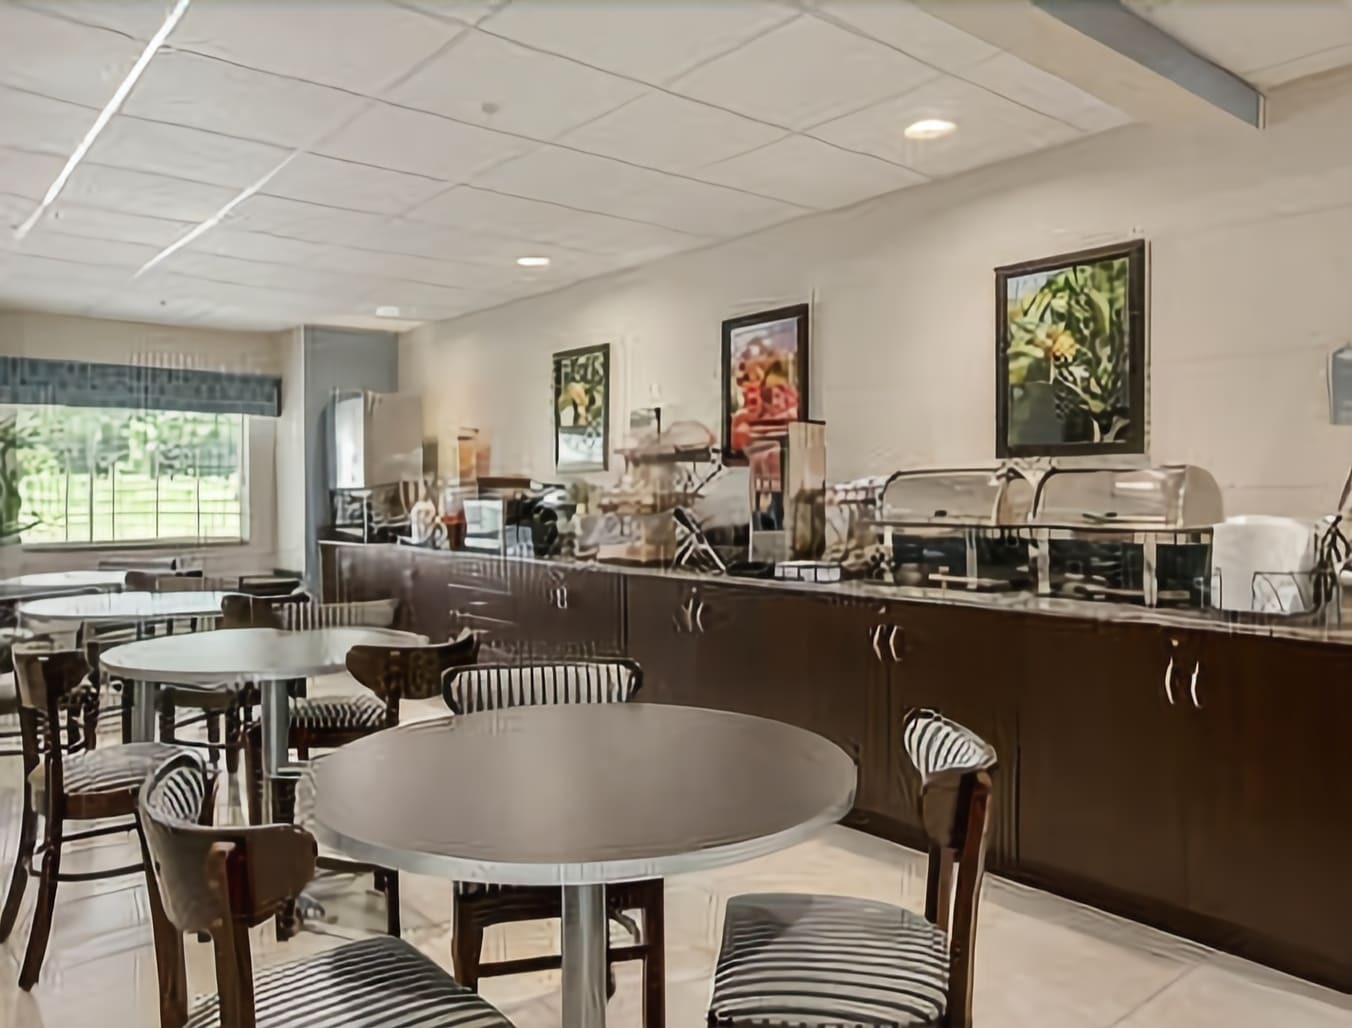 Microtel Inn & Suites Belle Chasse 외부 사진